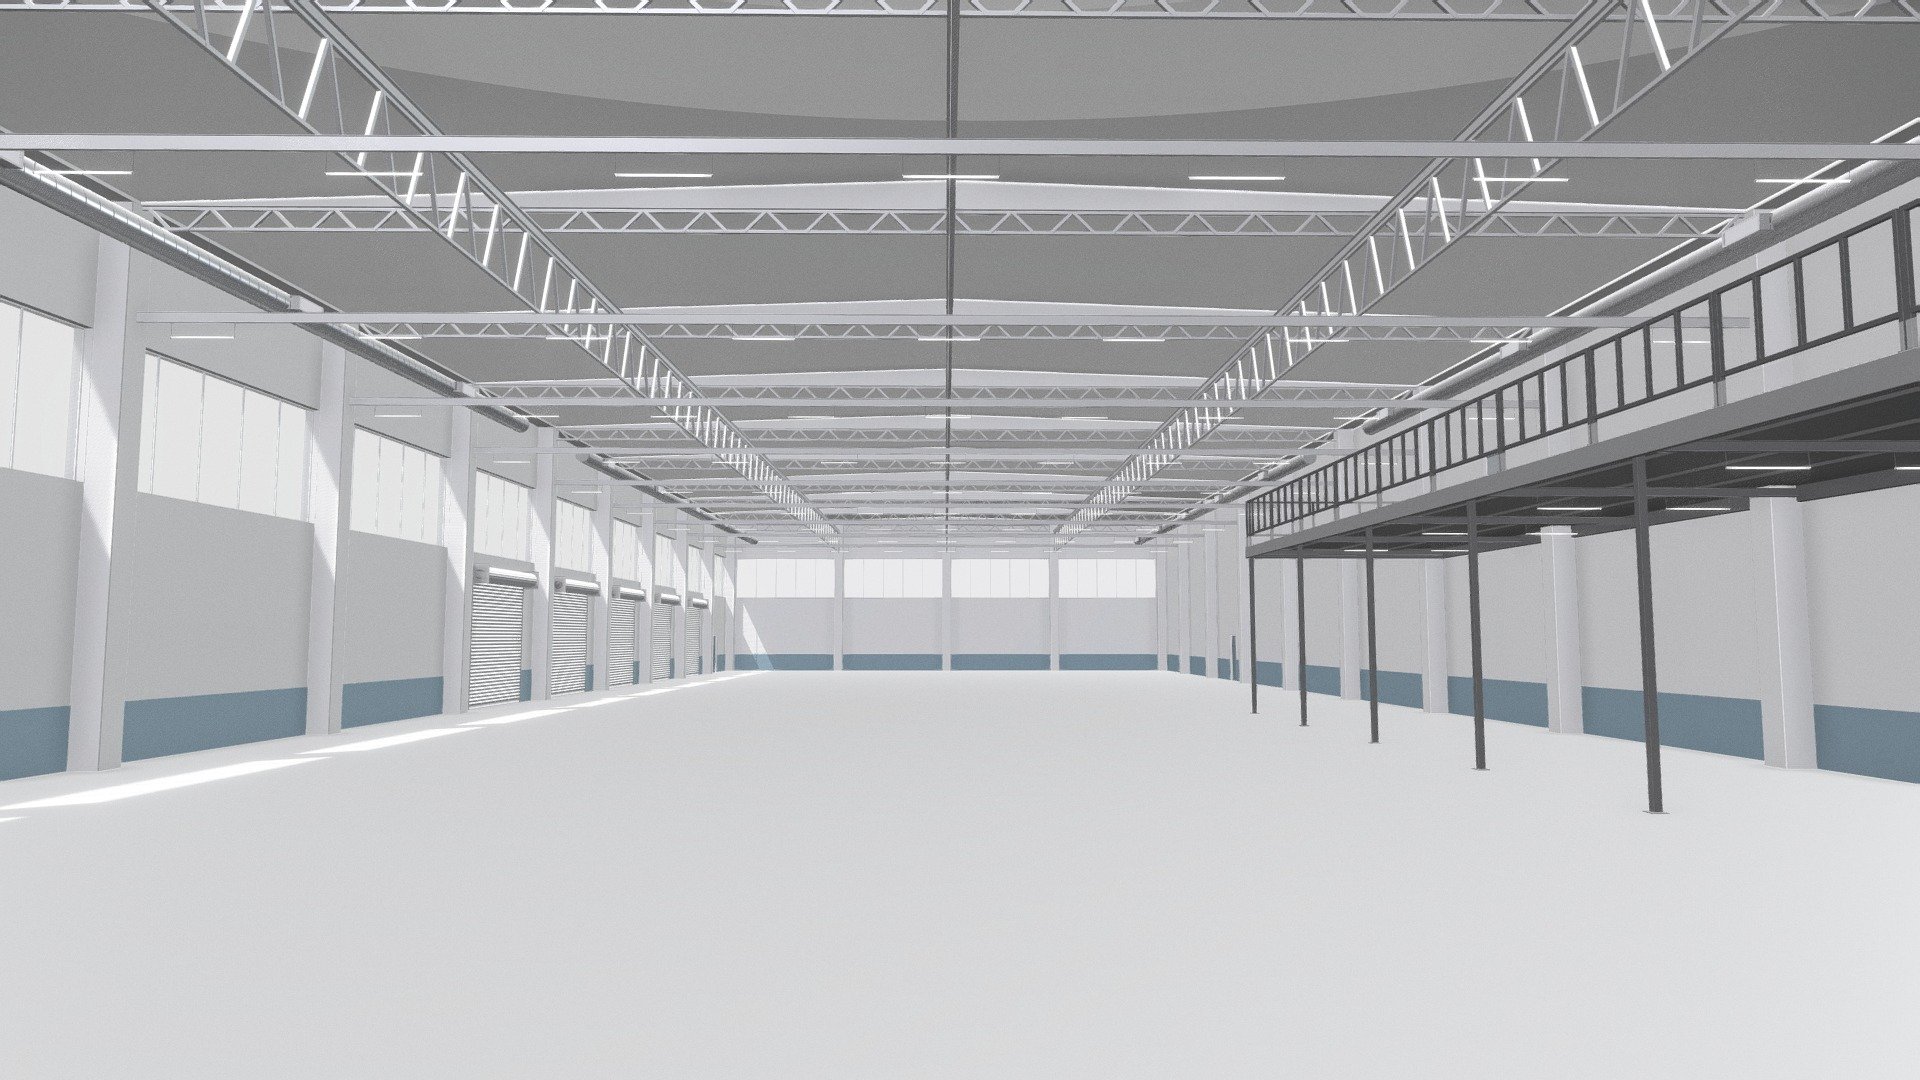 Warehouse Interior 2

Measurements:


L: 73.9m, W: 27.2m, H: 9.0m

IMPORTANT NOTES:


This model does not have textures or materials, but it has separate generic materials, it is also separated into parts, so you can easily assign your own materials.
Model units are in meters.

If you have any doubts or questions about this model, you can send us a message 3d model